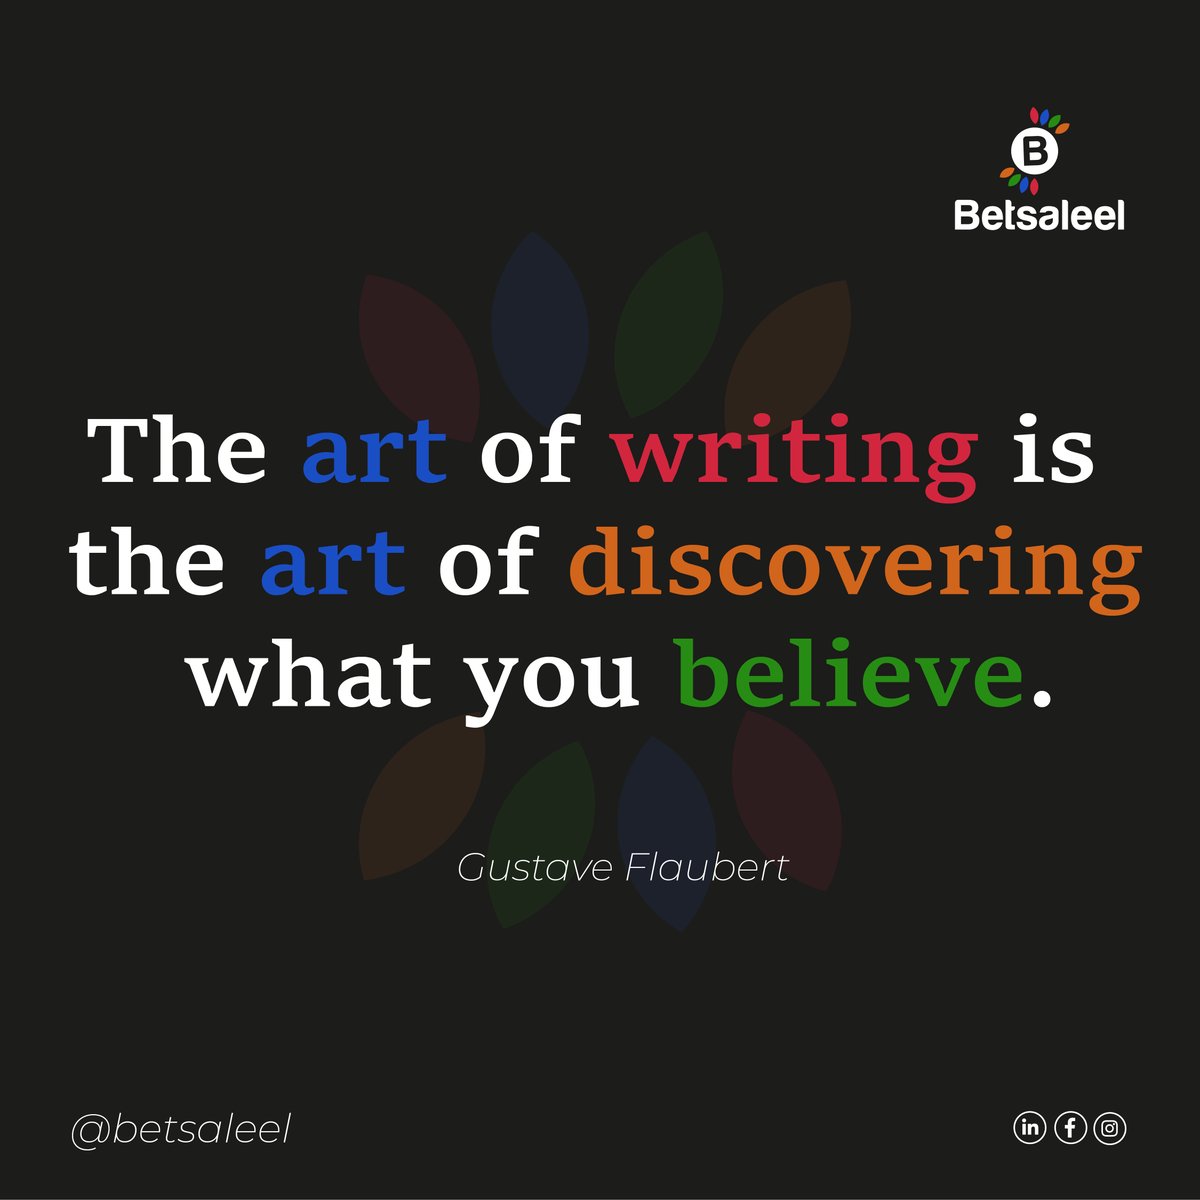 The art of writing is the art of discovering what you believe.

Gustave Flaubert 

#Betsaleel_company #CitationEN #Designerthinking #art #discover #believe